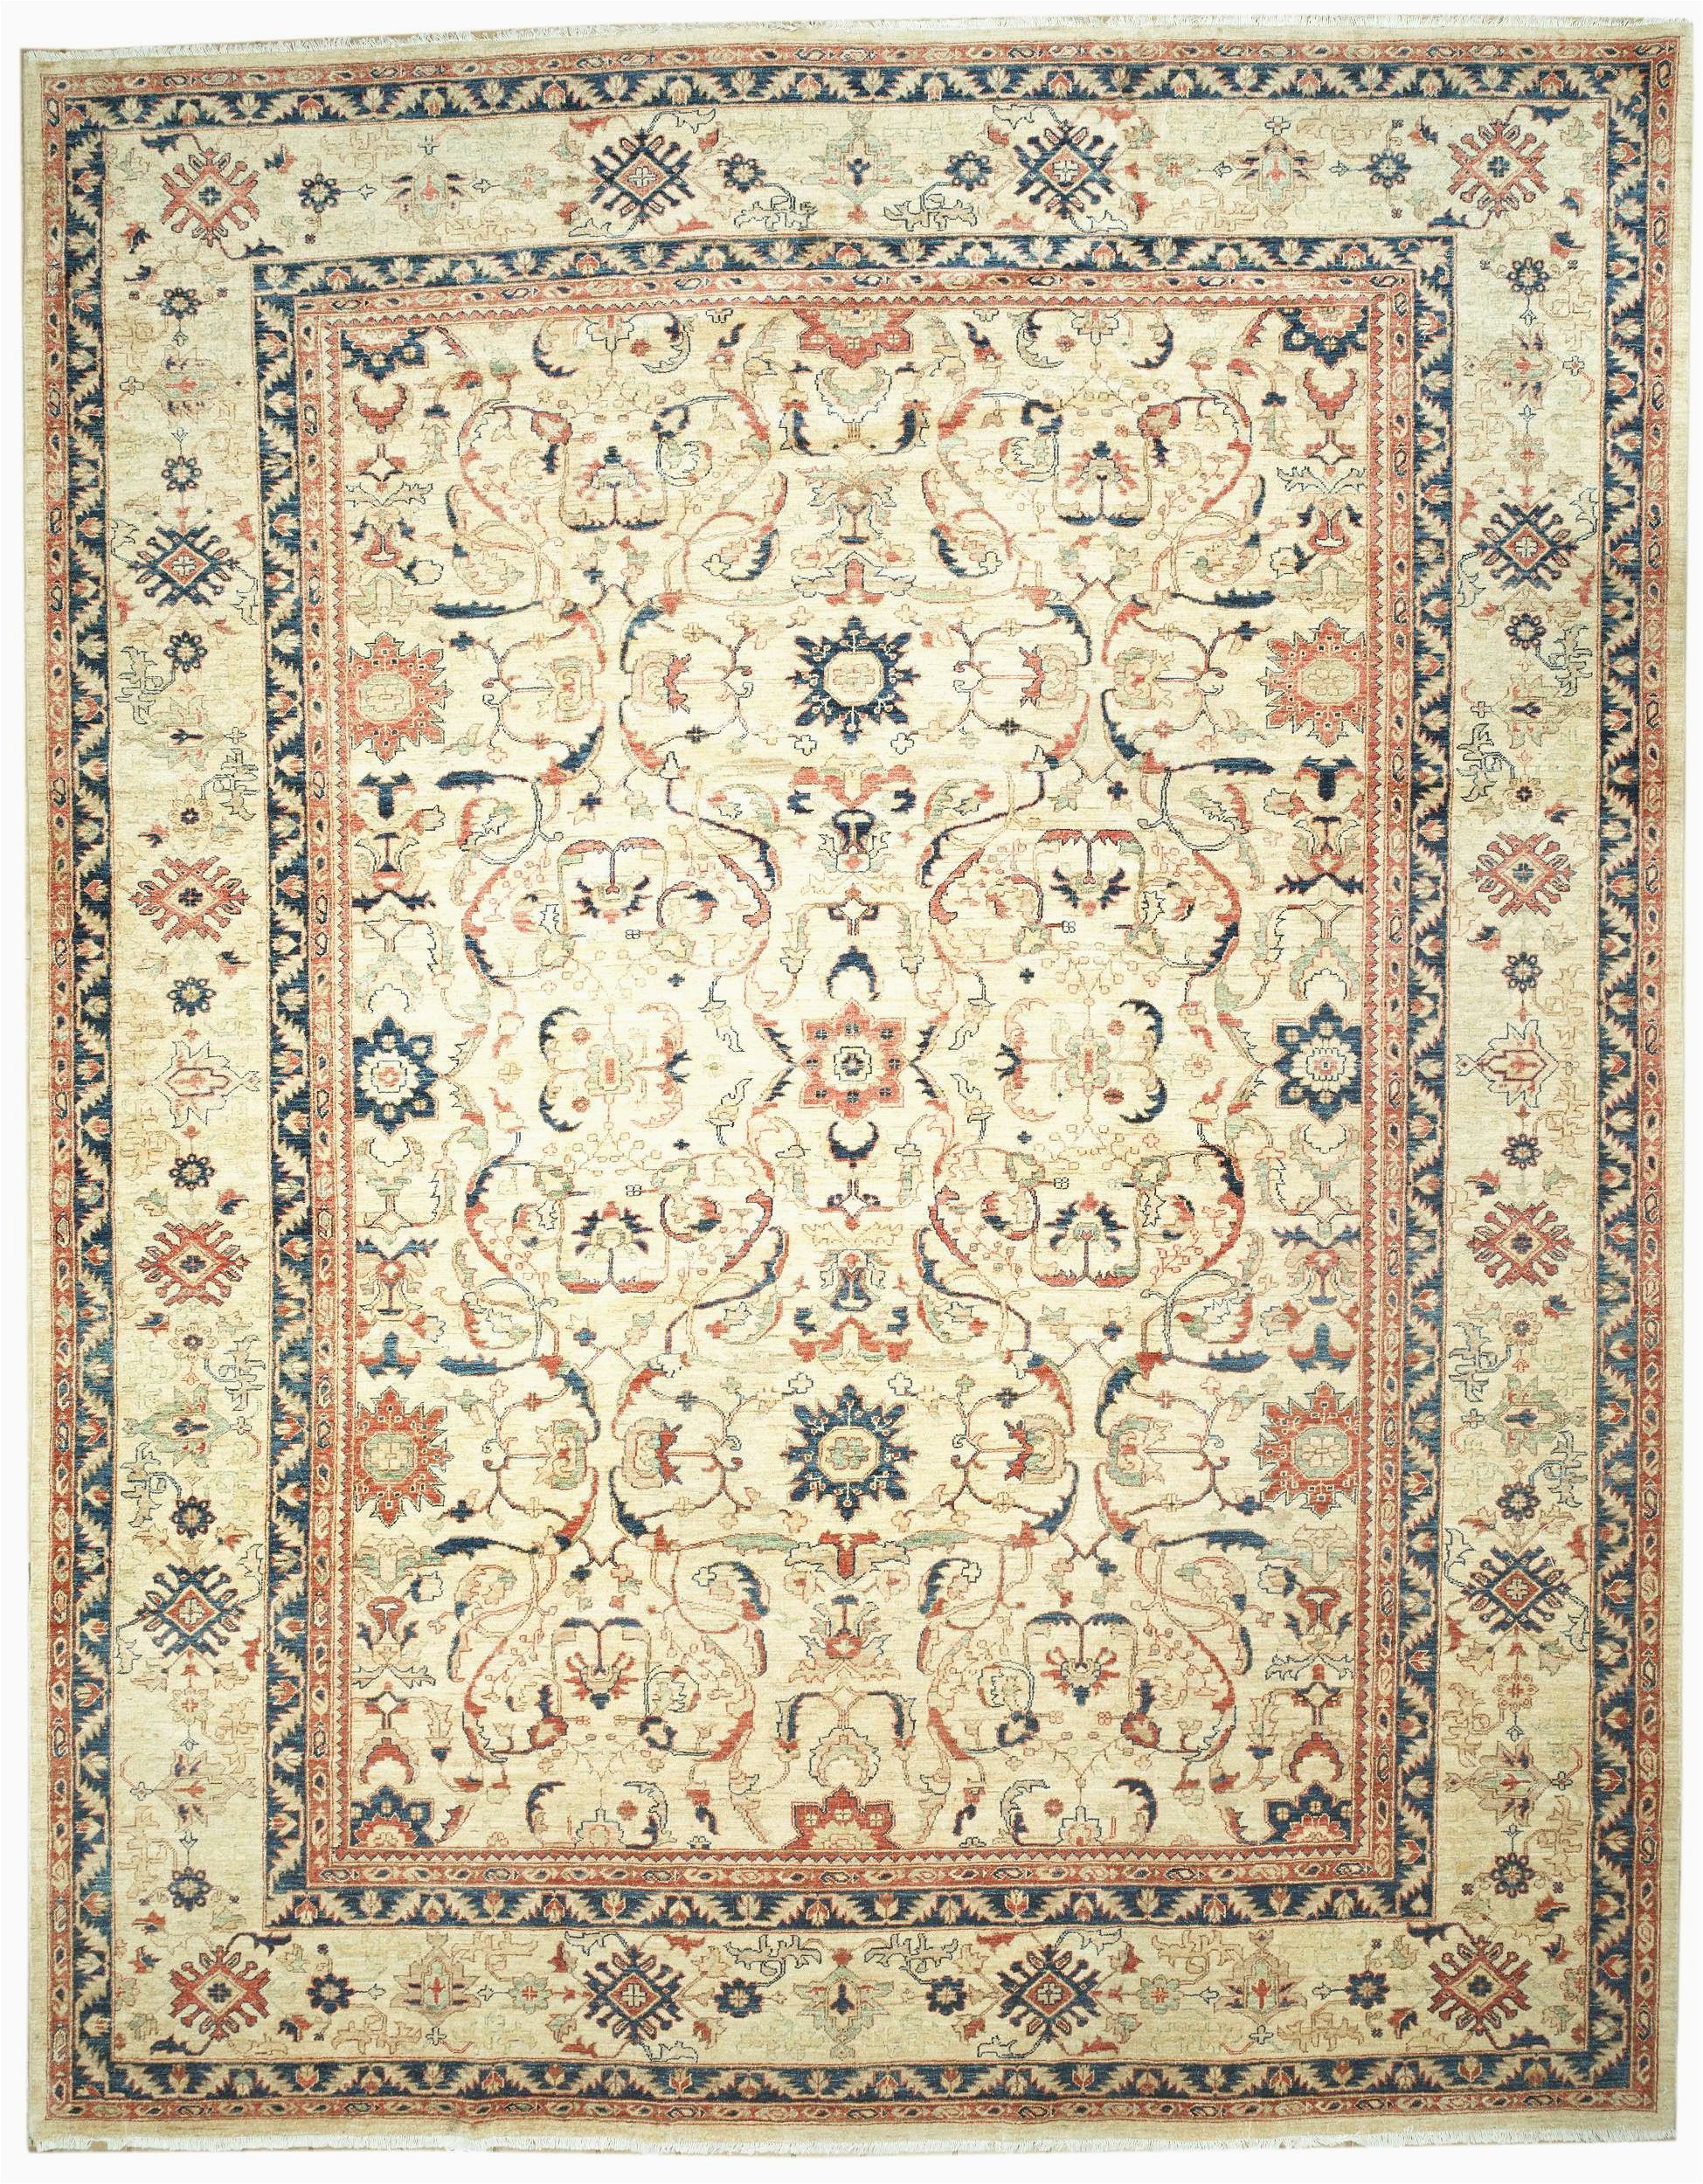 Large area Rugs 12 X 15 This Beautiful Handmade Knotted Rectangular Rug is